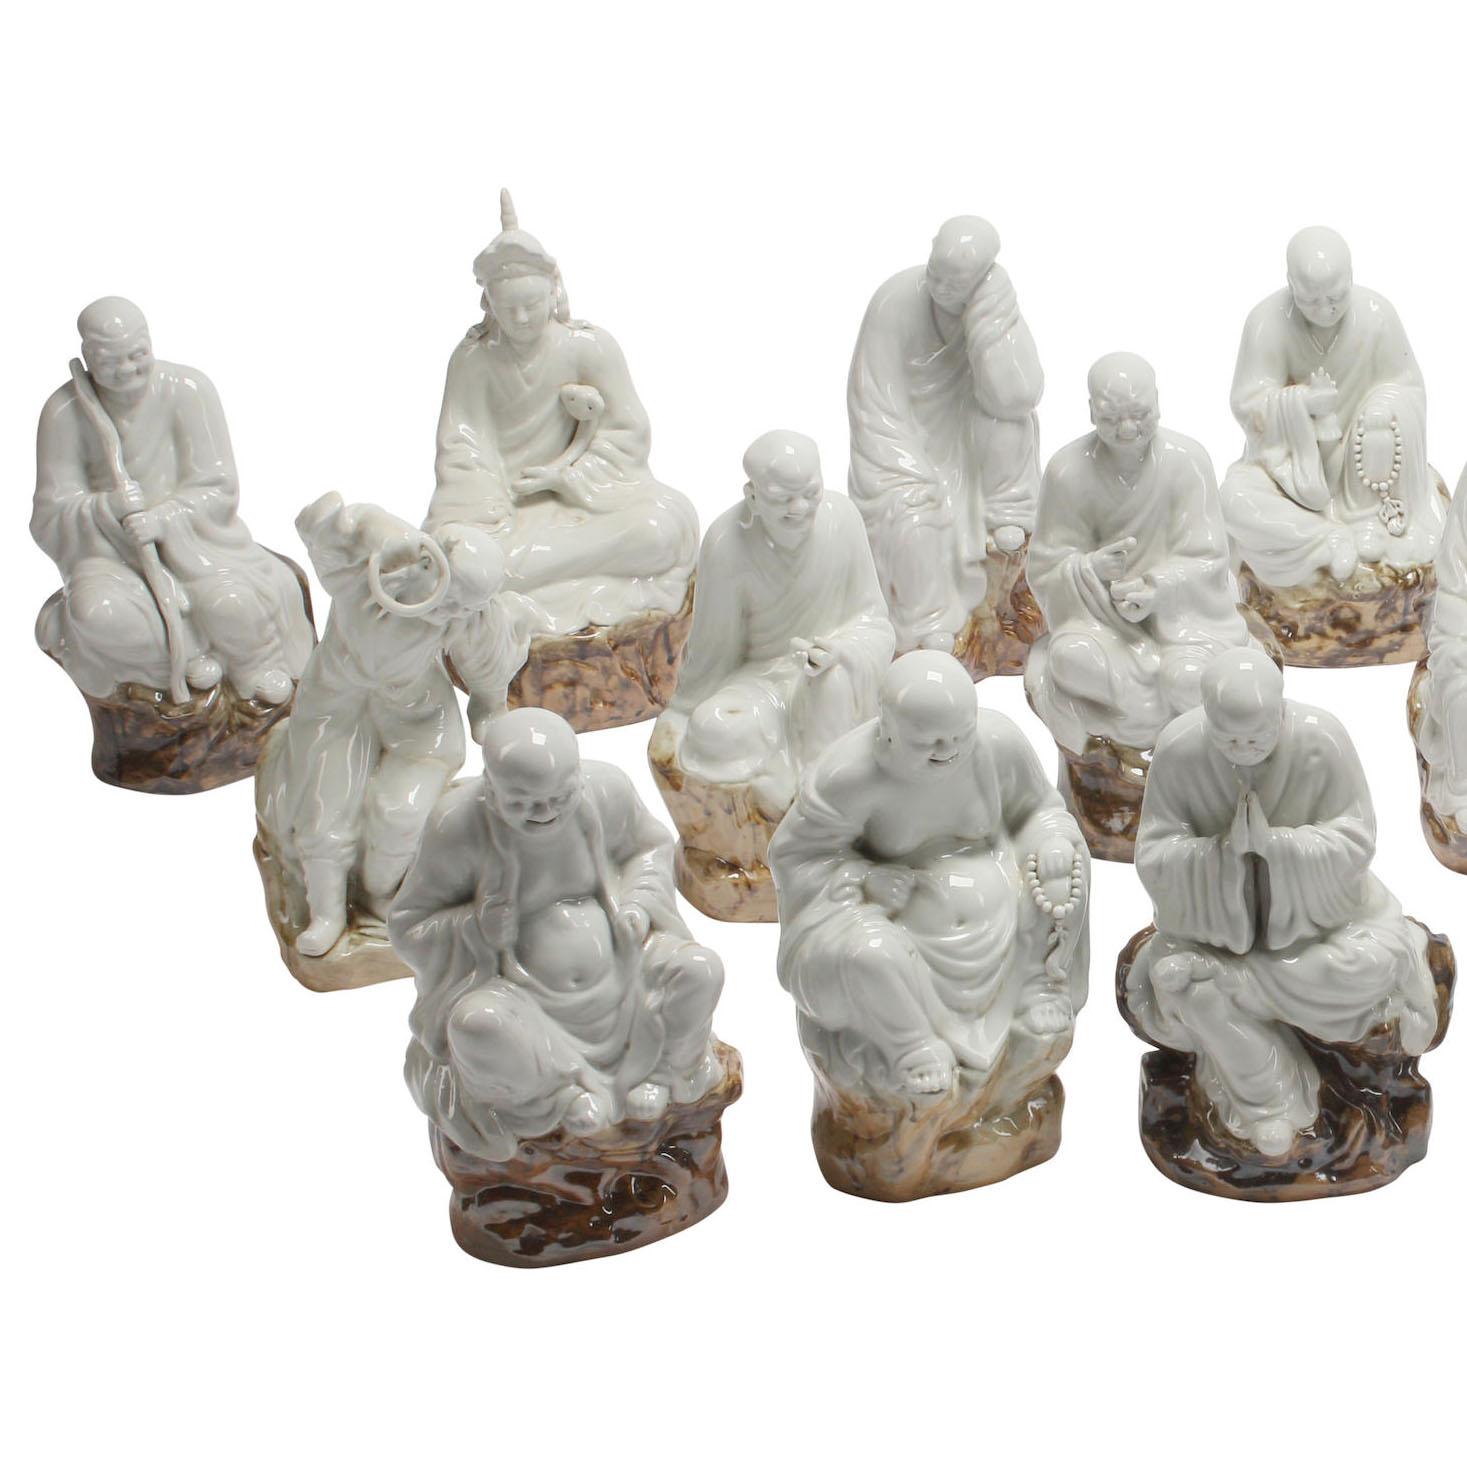 A rare set of eighteen Blanc de Chine Style Enameled - Glazed Ceramic Arhat, also known as Luohans, the disciples of Buddha, each bearing the mark and style of the Chinese maker Zeng Longsheng. The Eighteen Arhats (or Luohan) (Chinese: ????; pinyin: